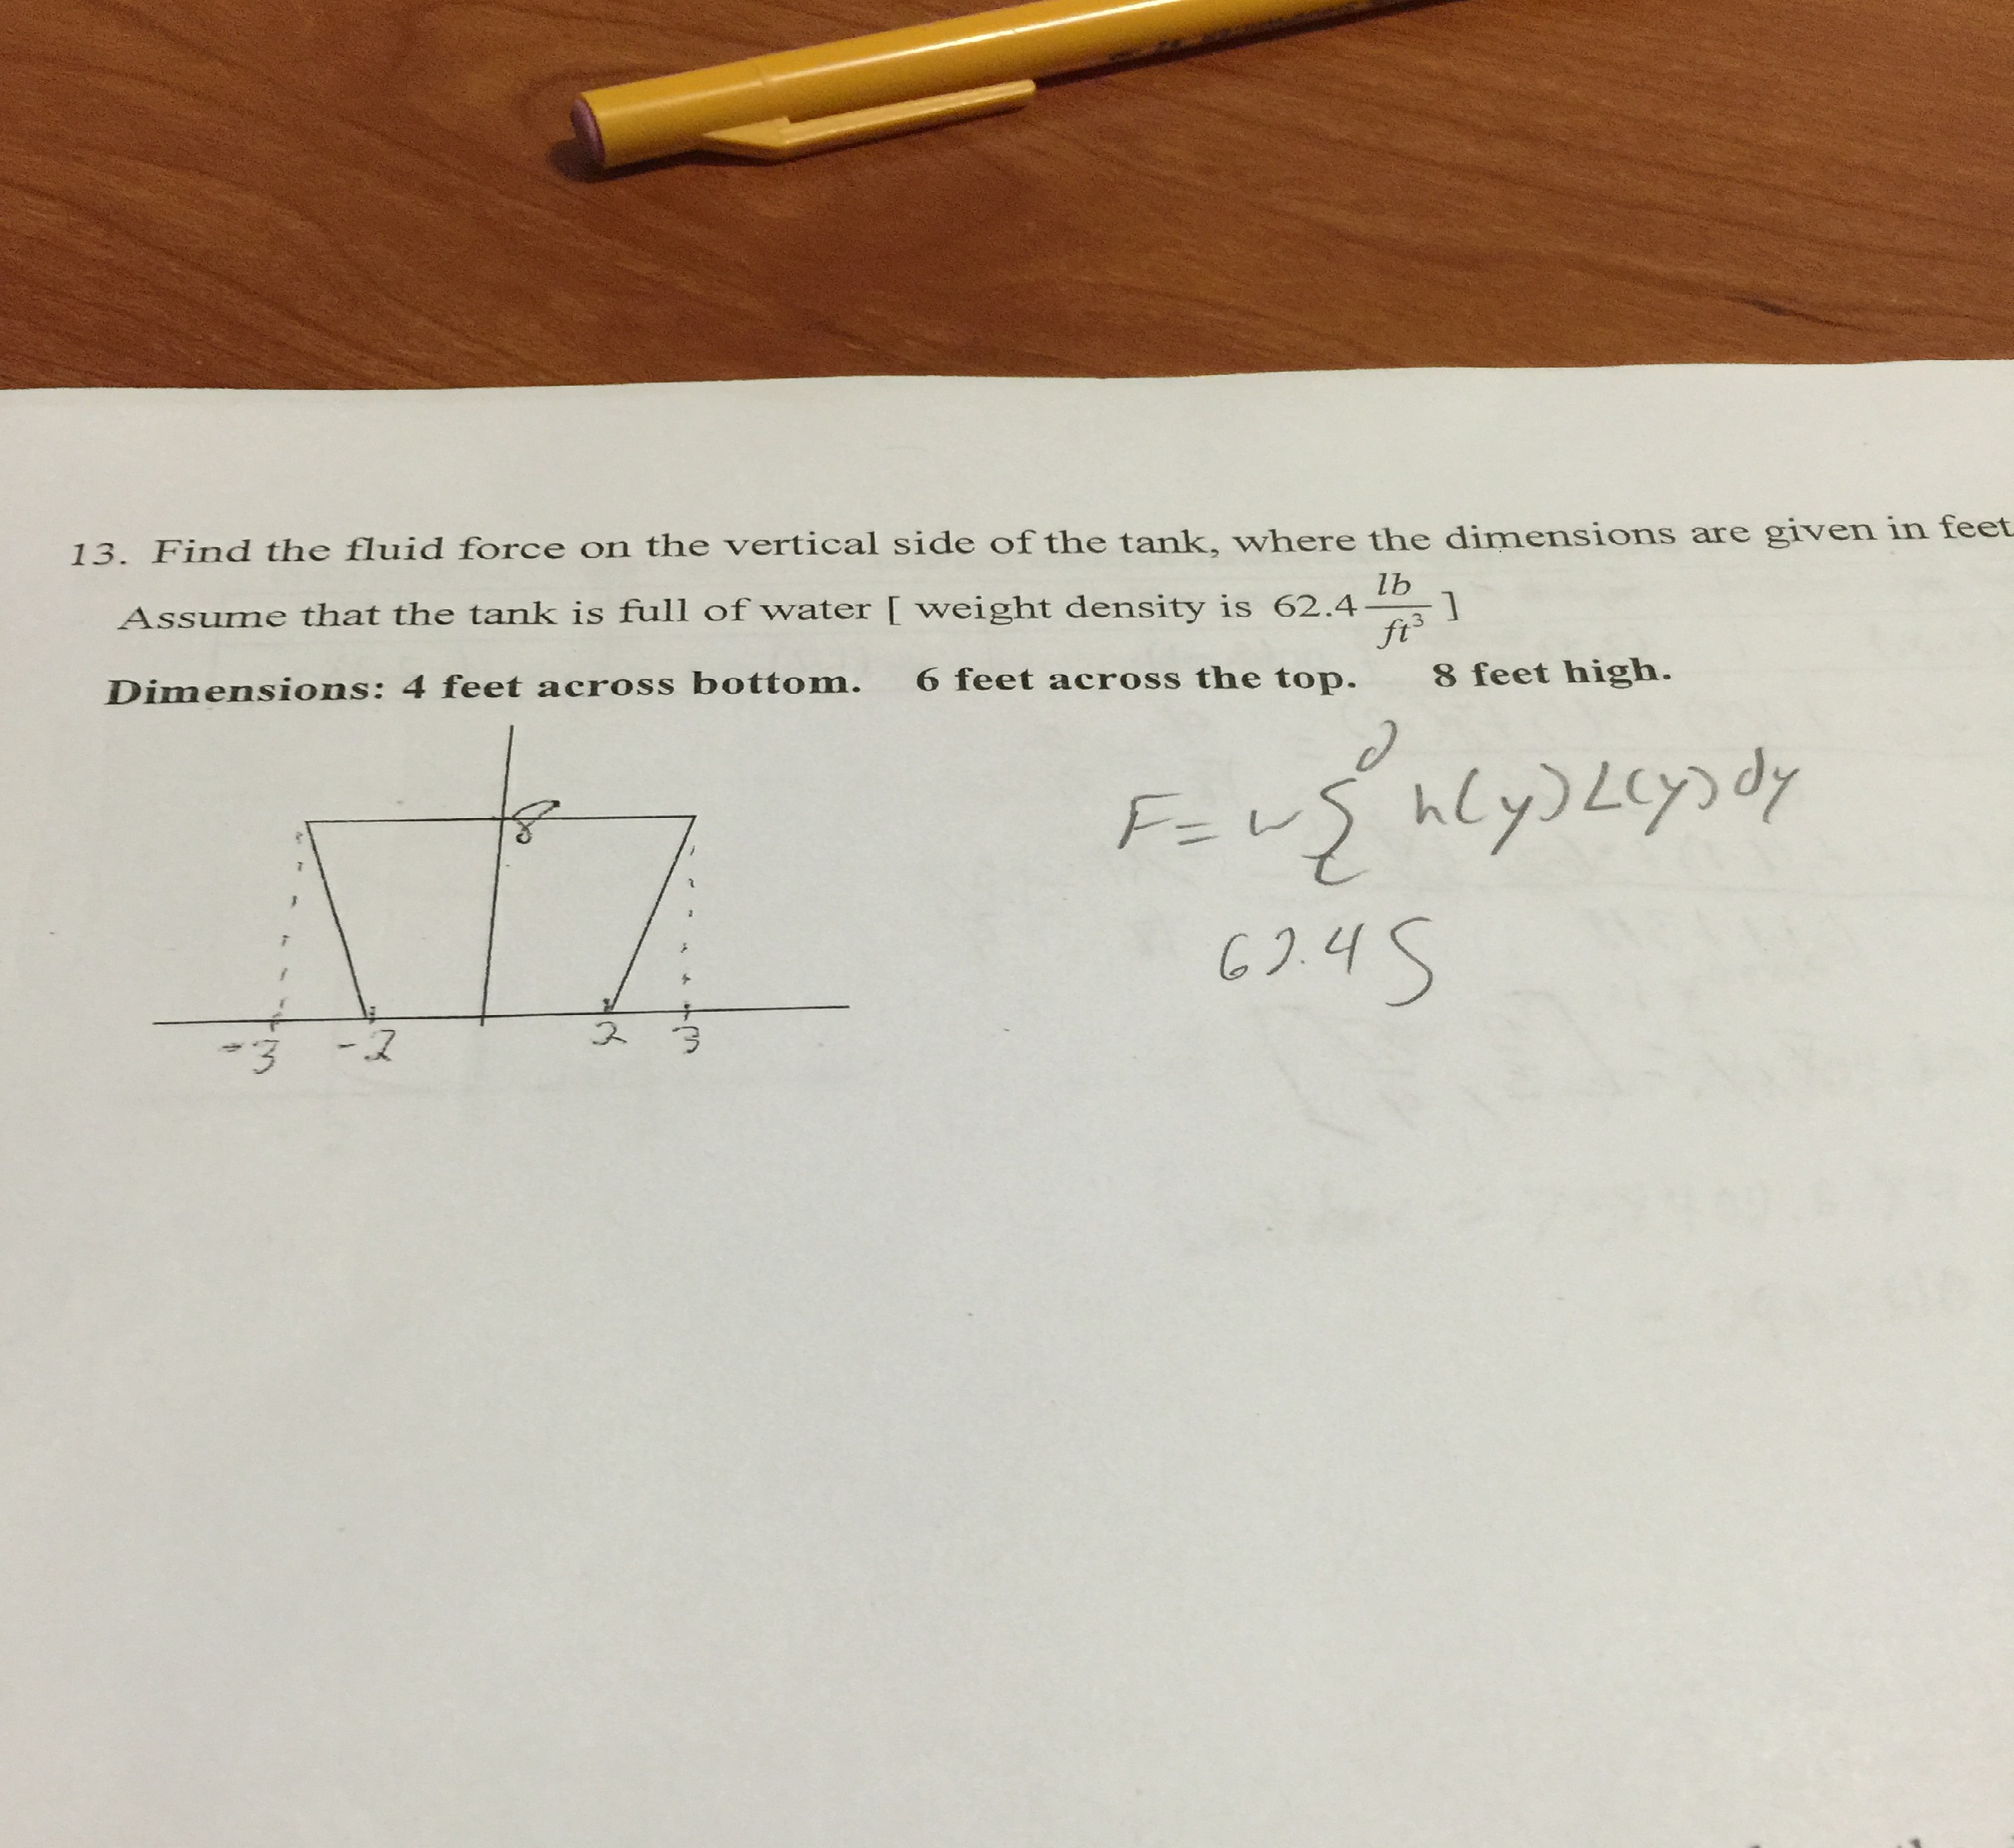 find the fluid force on the vertical side of the tank triangle